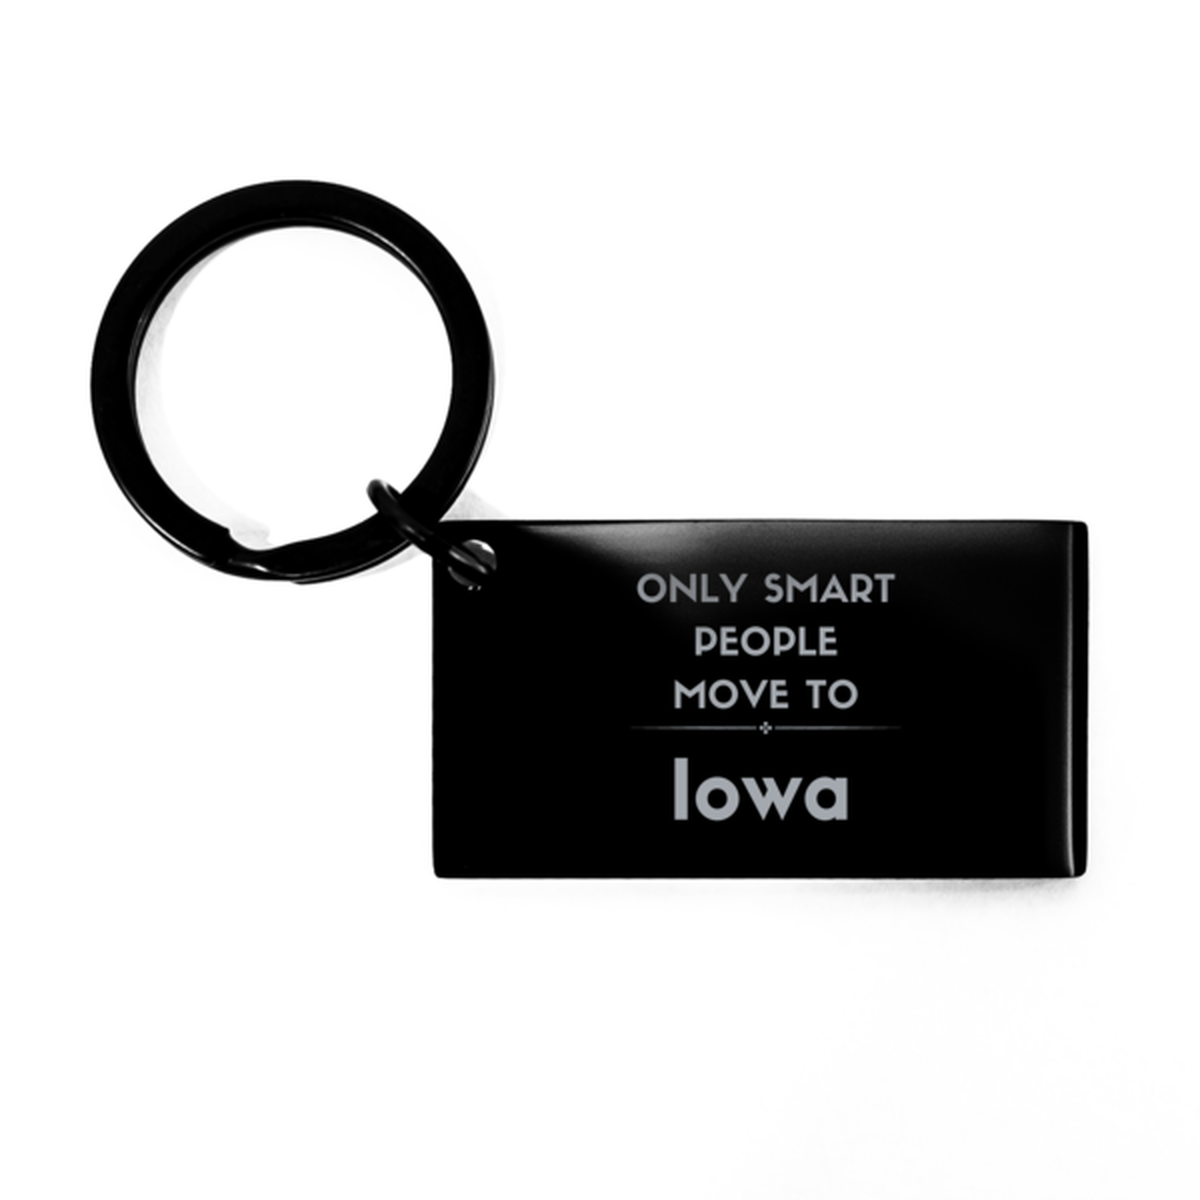 Only smart people move to Iowa Keychain, Gag Gifts For Iowa, Move to Iowa Gifts for Friends Coworker Funny Saying Quote